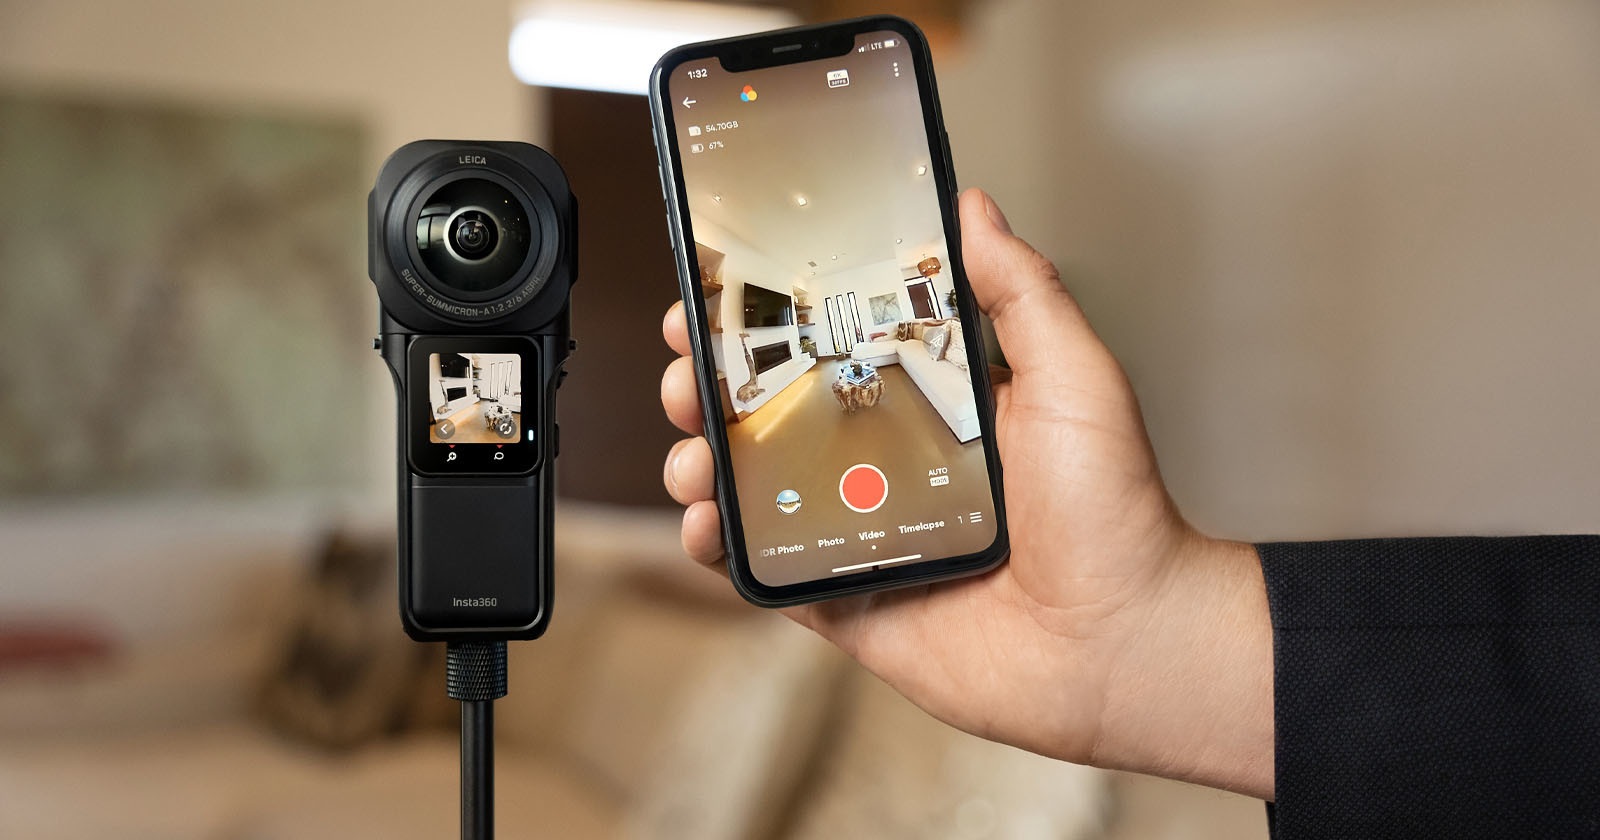  select insta360 cameras are now compatible matterport 